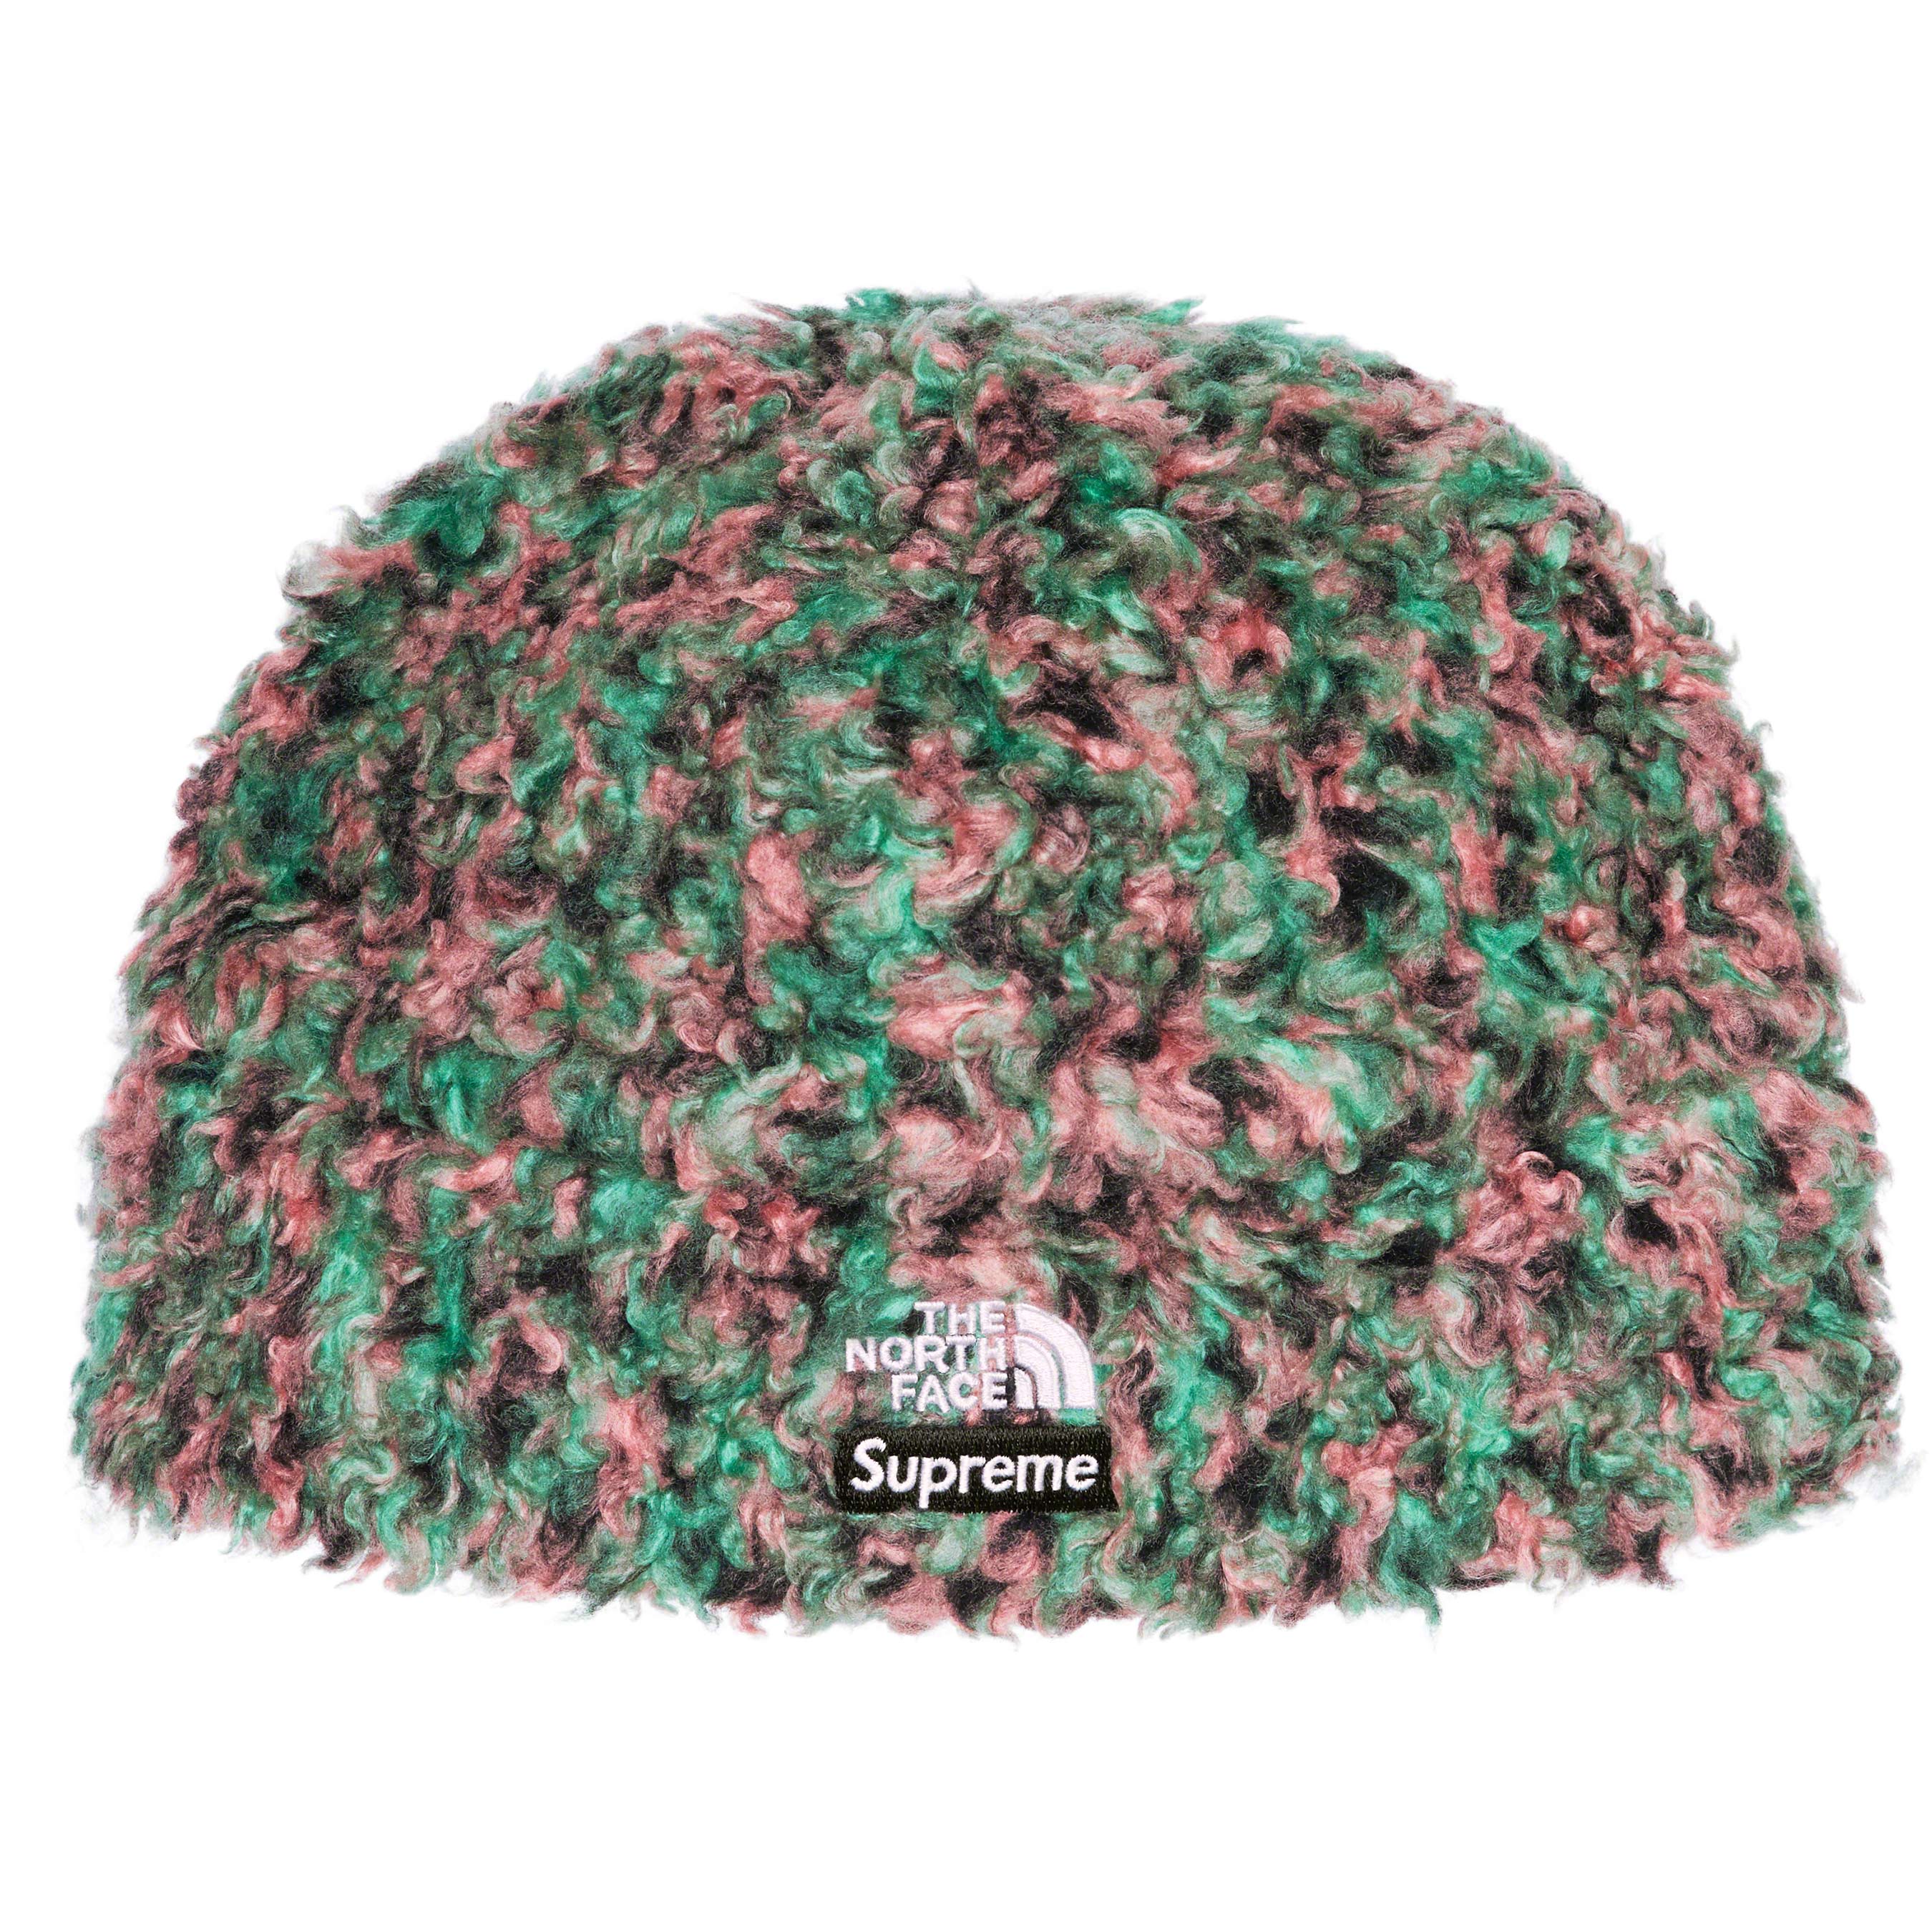 The North Face High Pile Fleece Beanie   spring summer    Supreme